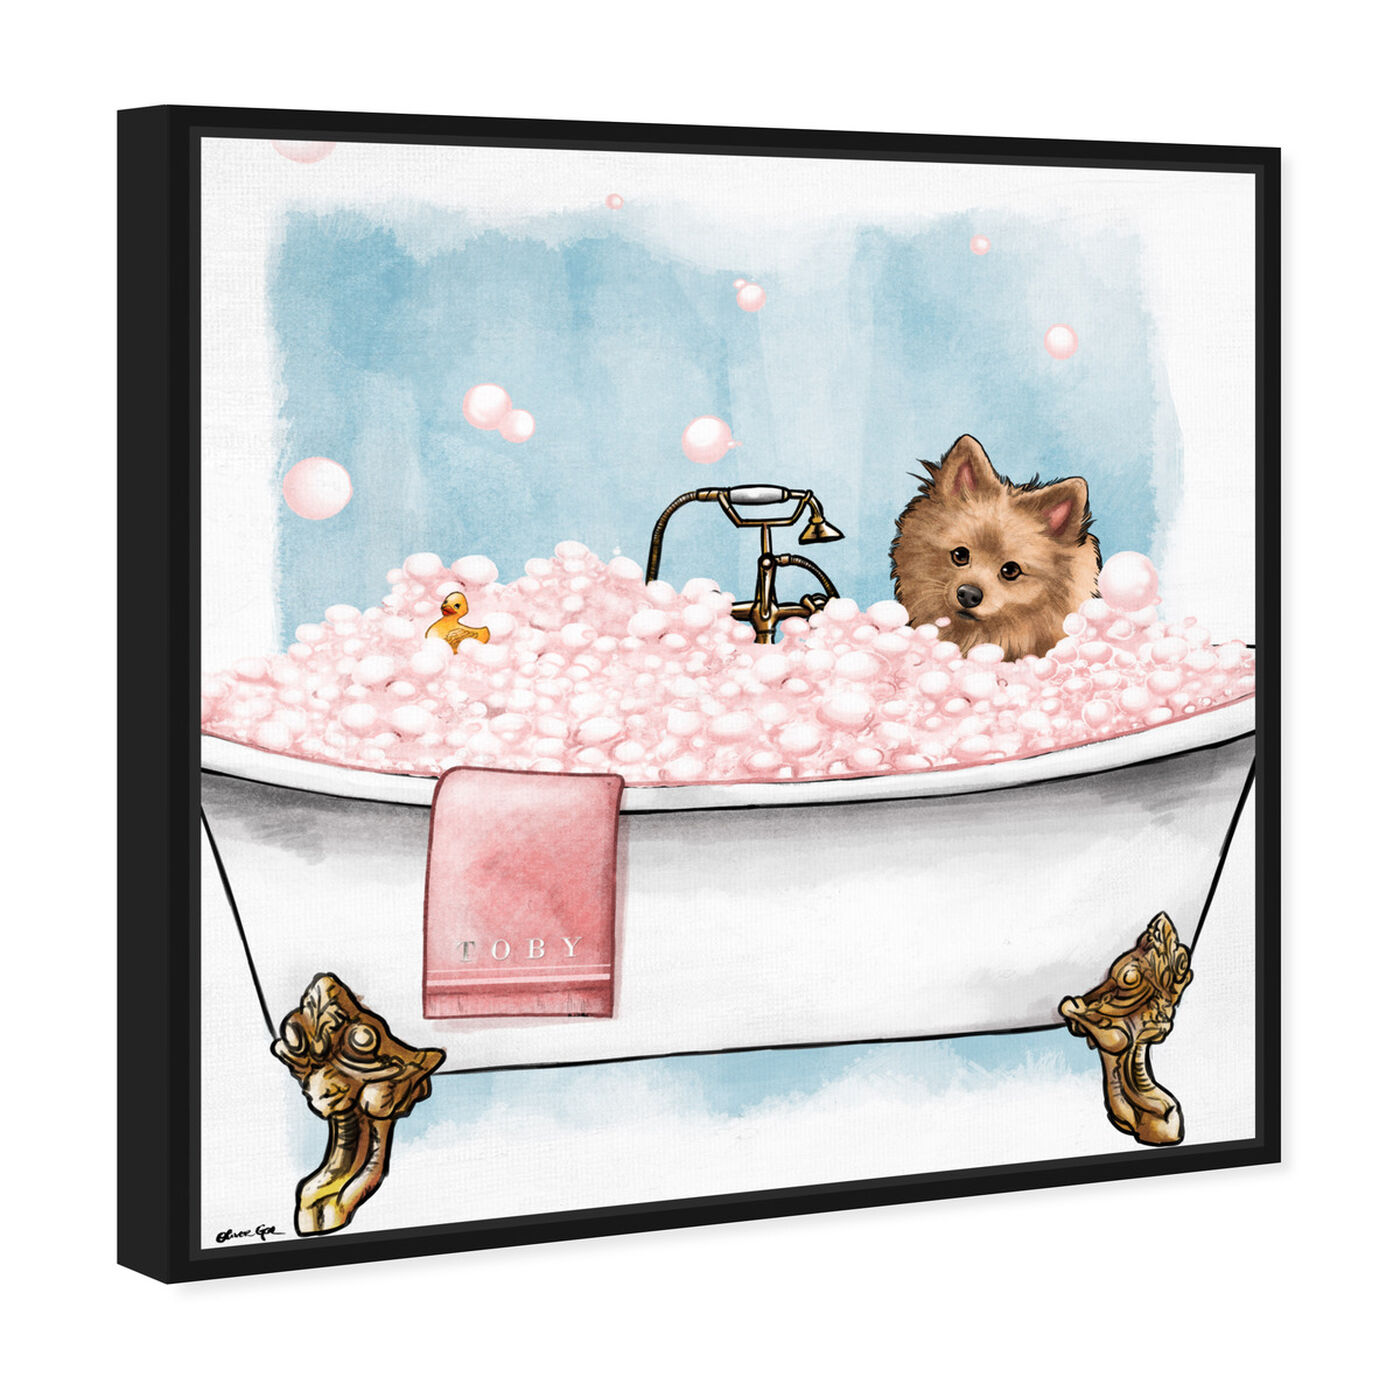 Angled view of Pets in the tub featuring bath and laundry and bathtubs art.